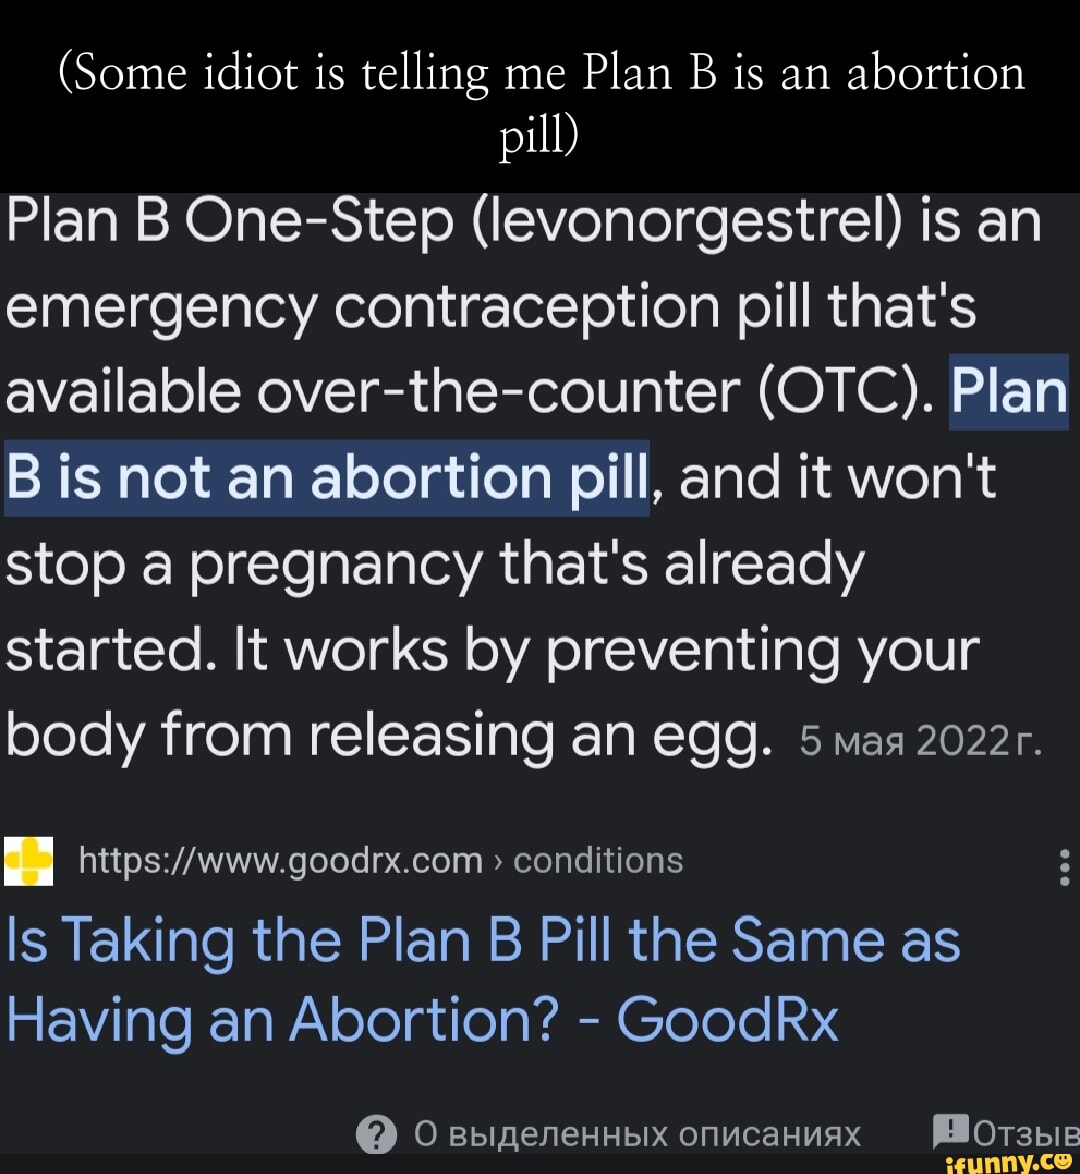 Where Can I Get Plan B for Free? - GoodRx